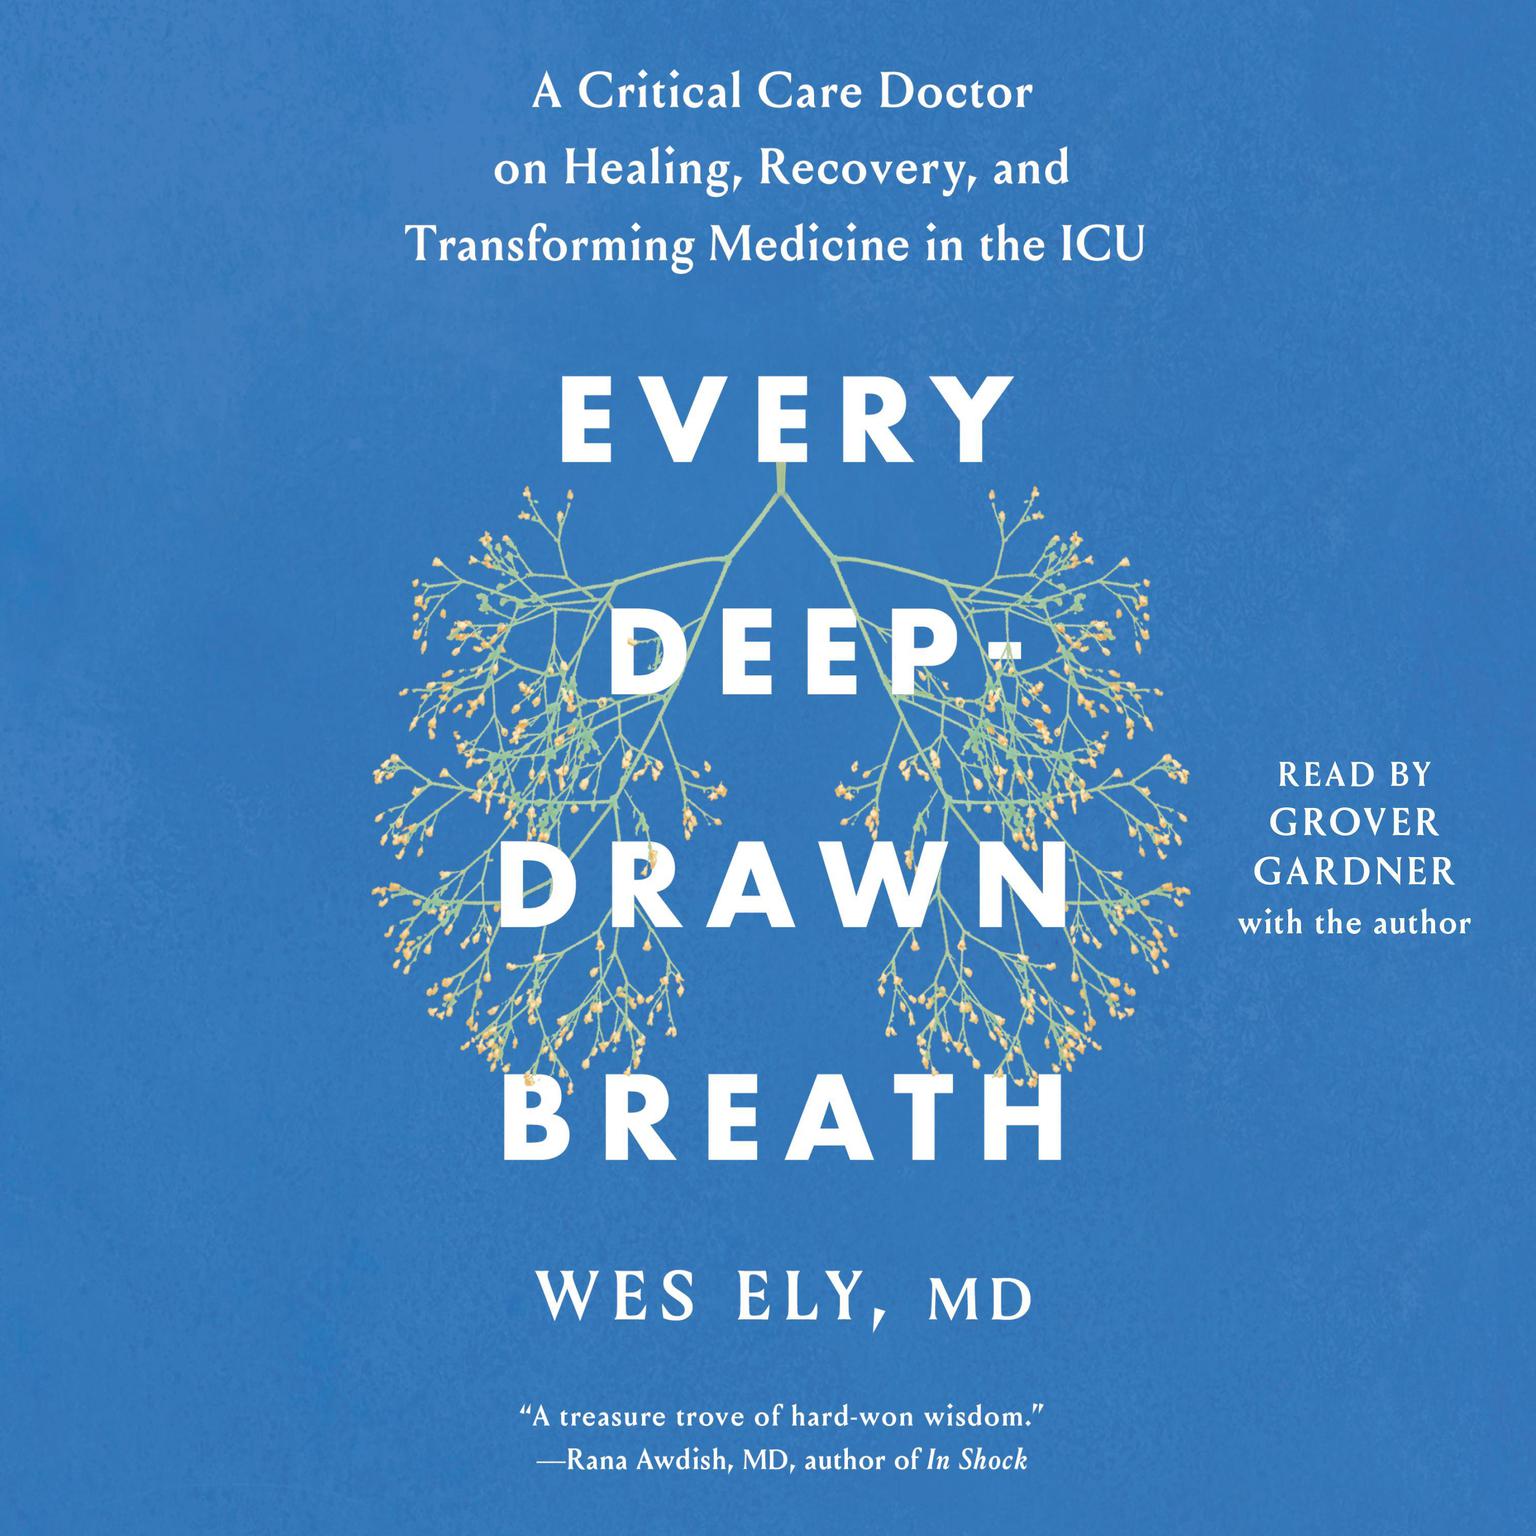 Every Deep-Drawn Breath: A Critical Care Doctor on Healing, Recovery, and Transforming Medicine in the ICU Audiobook, by Wes Ely